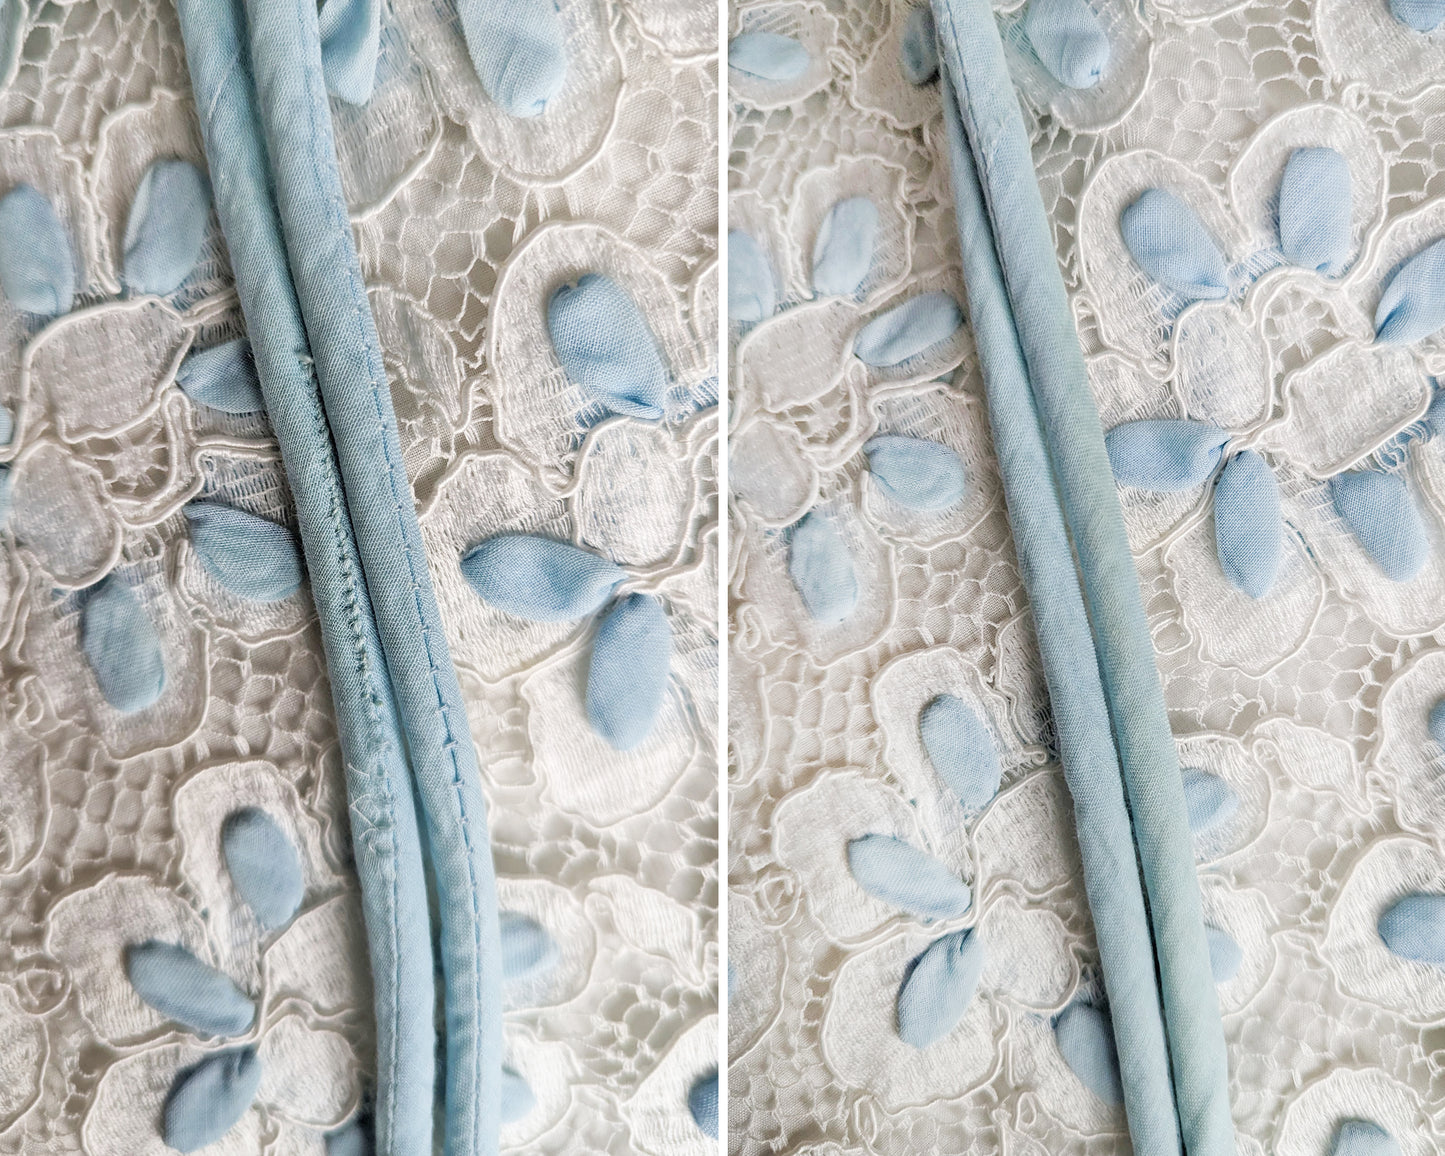 Side by side photos of small flaws on the belt. The left photo shows a mended seam and the right shows a small discolored spot on the other belt.